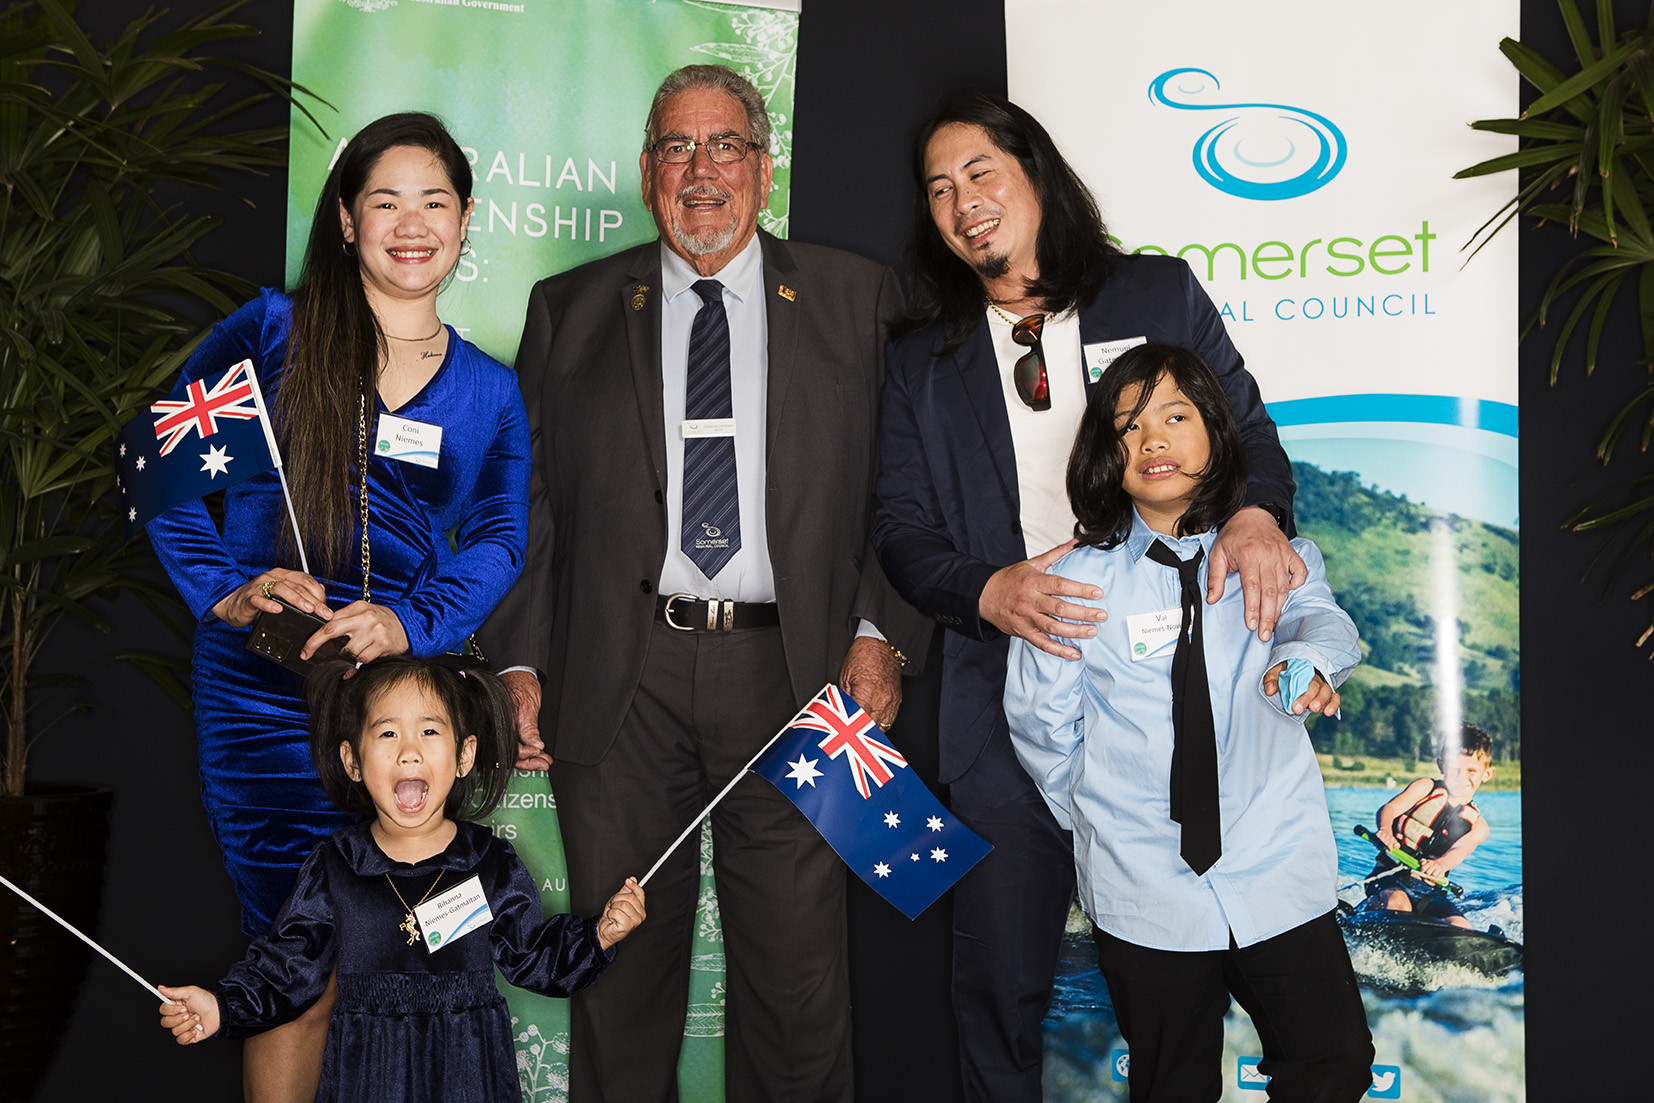 Mayor Graeme Lehmann enjoys a moment with a family of new Aussies at the citizenship ceremony on 1 September at the Somerset Civic Centre in Esk.